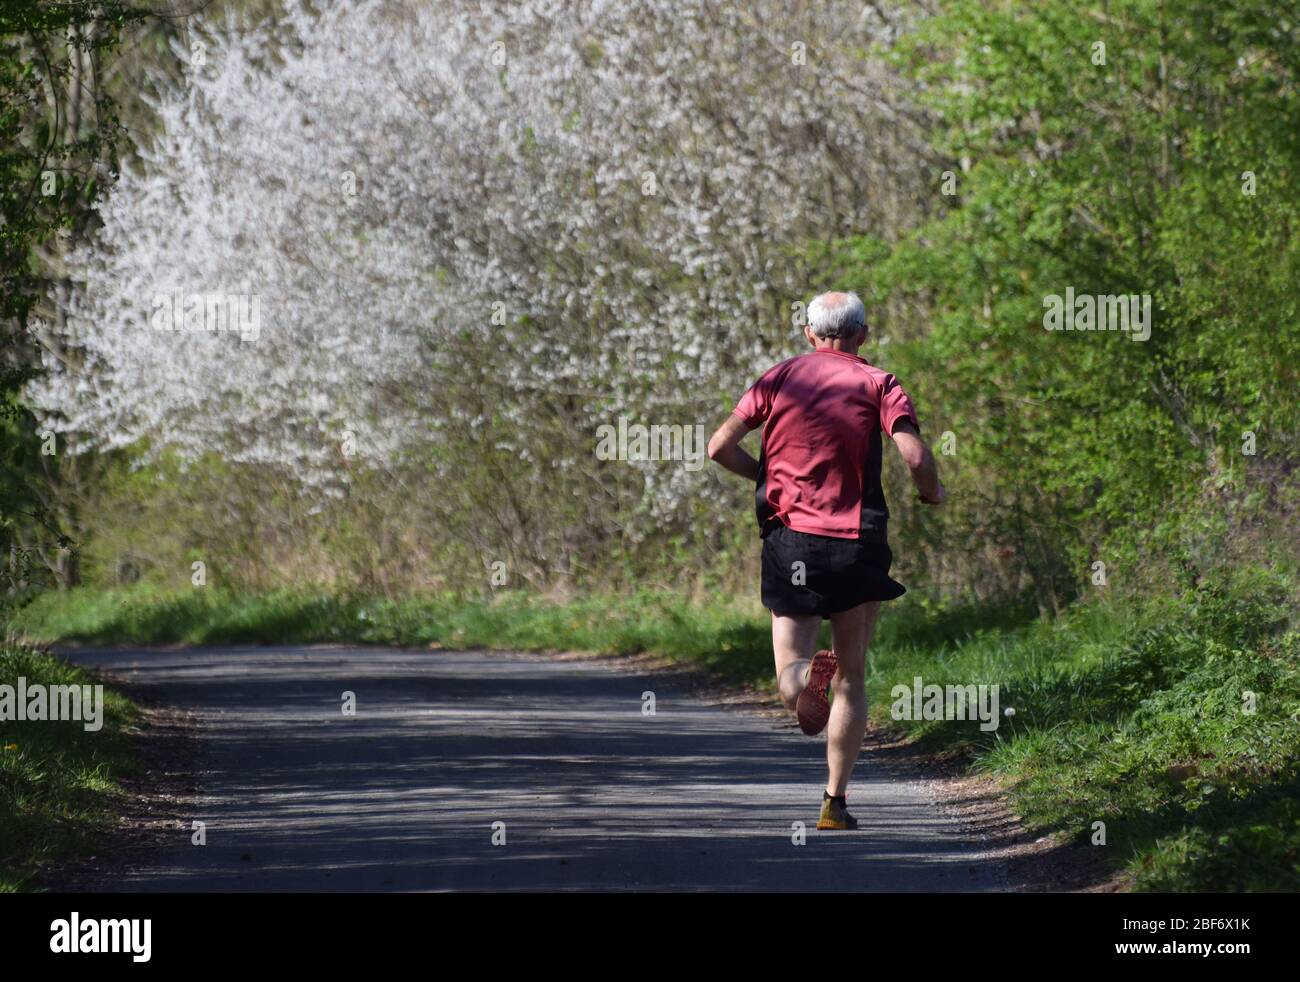 A fit and active elderly man aged over 70 going for a run Stock Photo